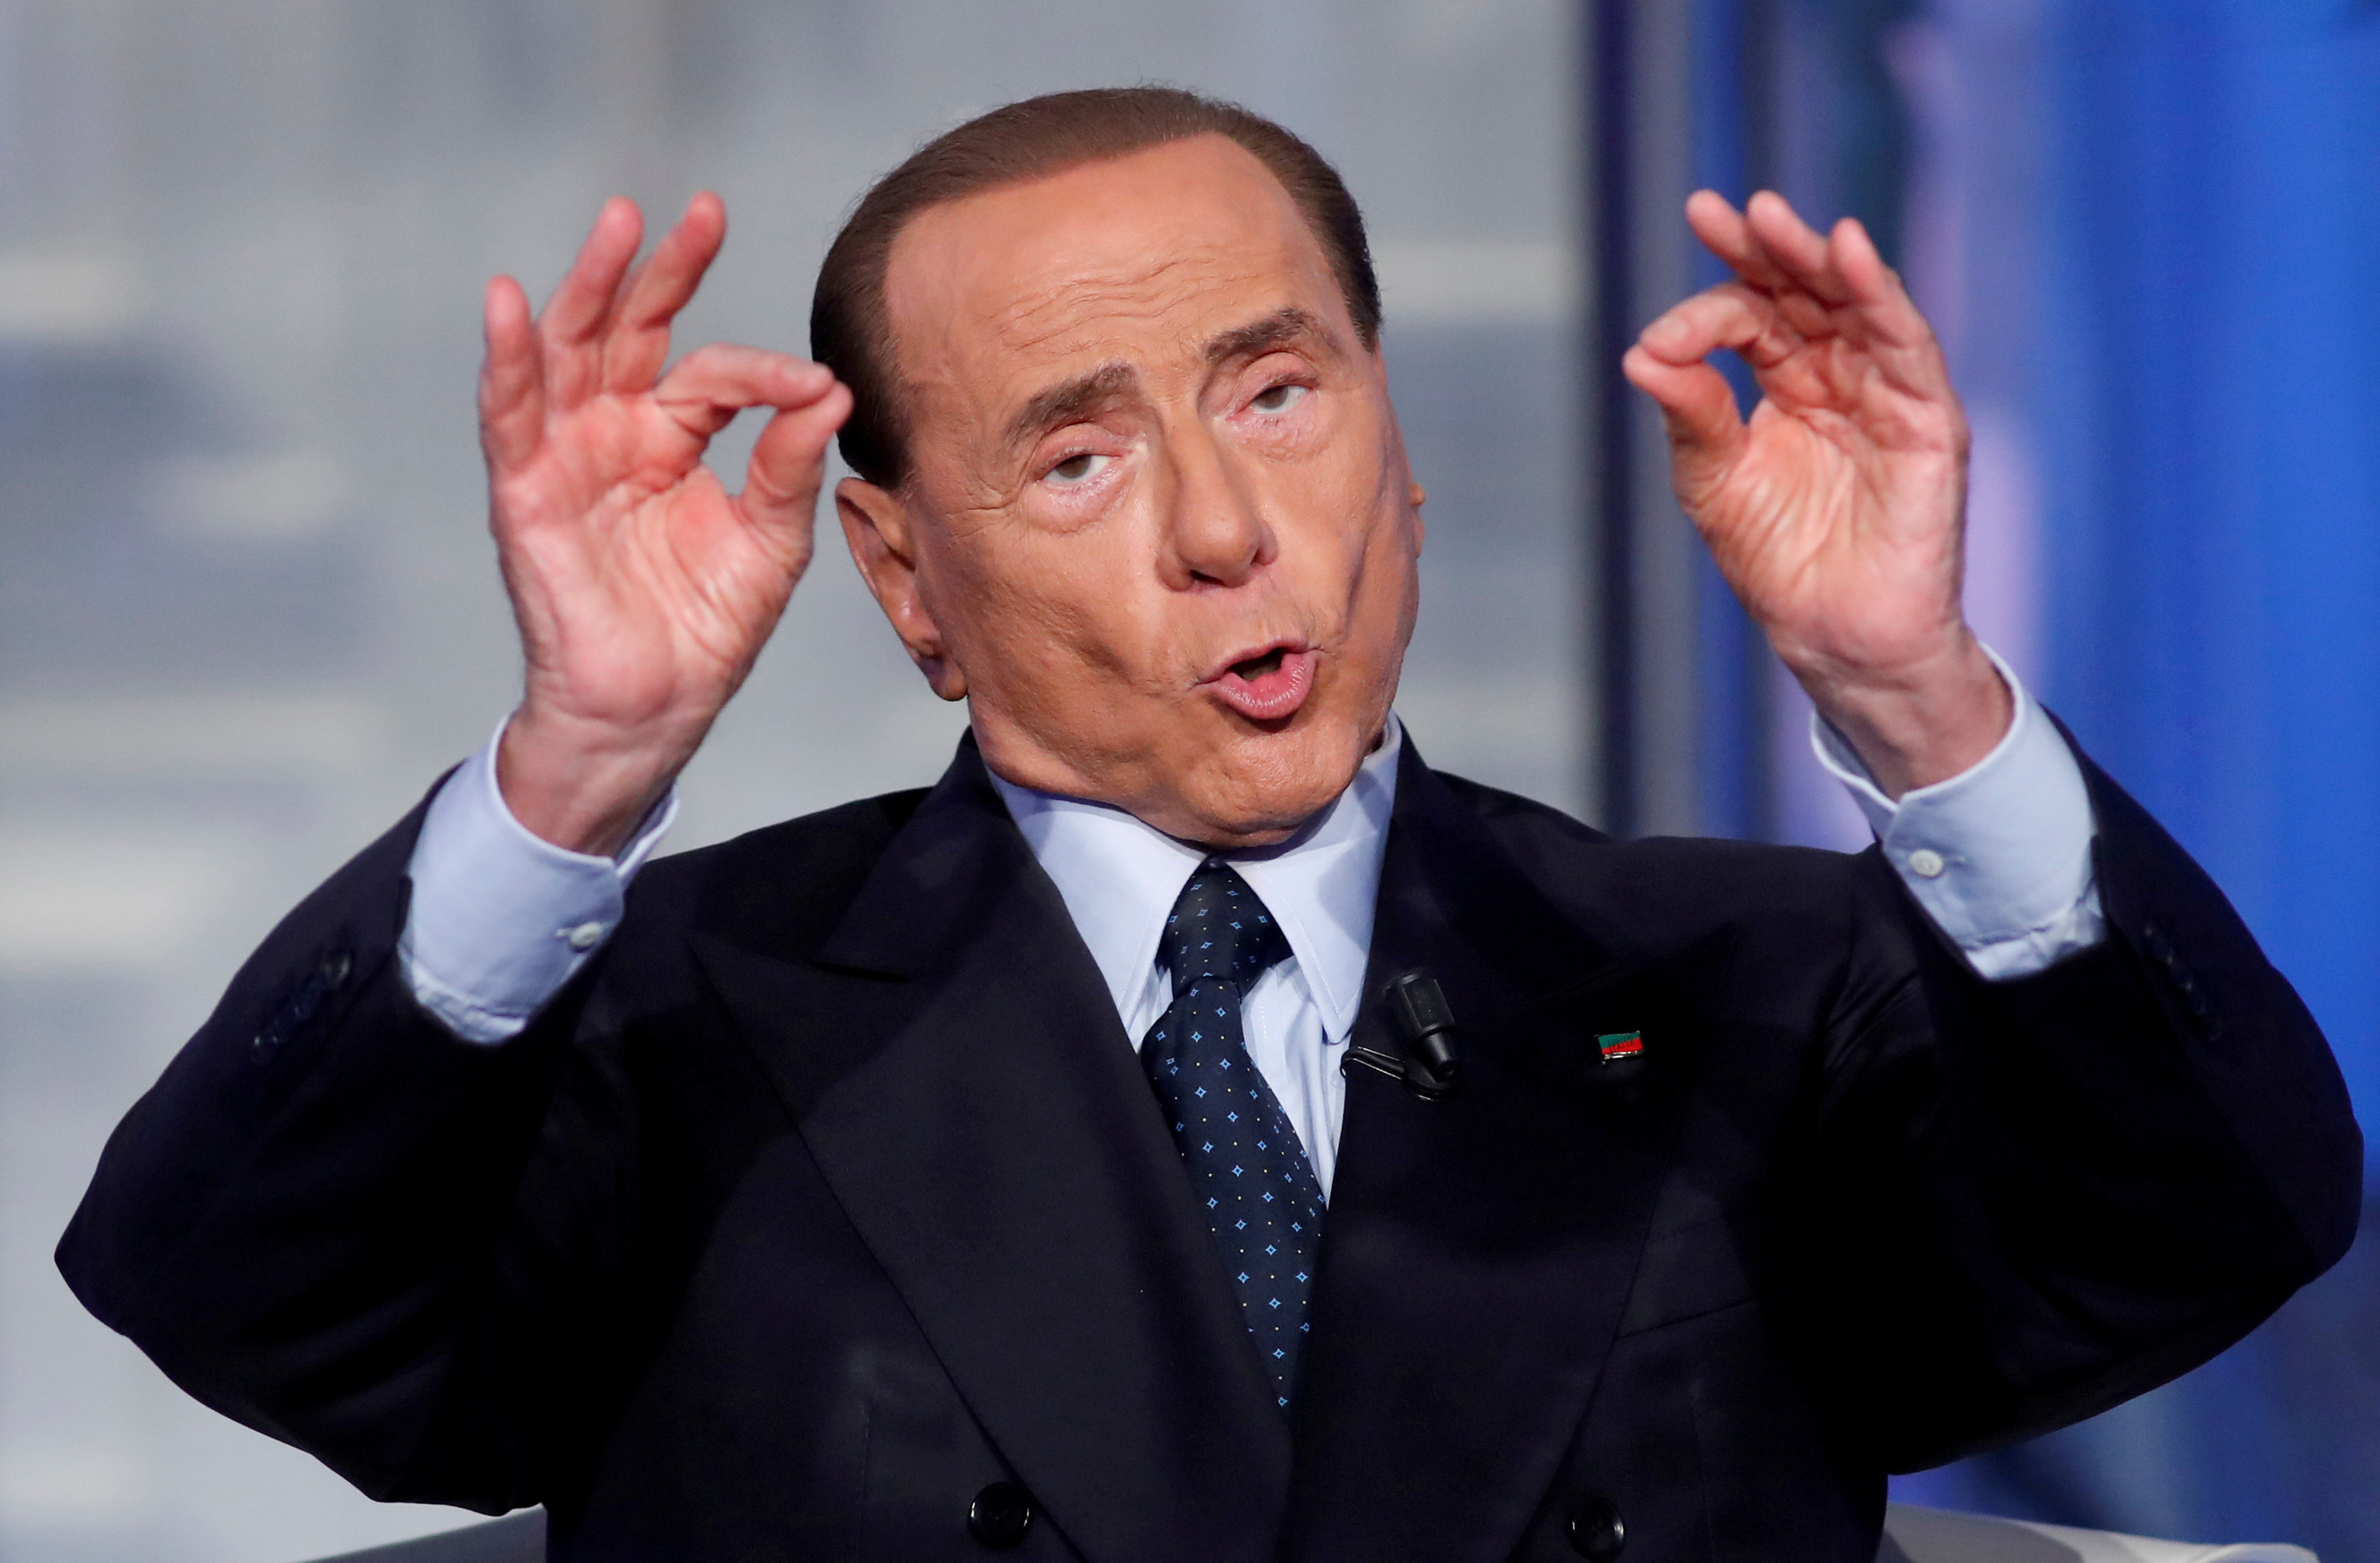 Berlusconi takes fight against ban from office to European court